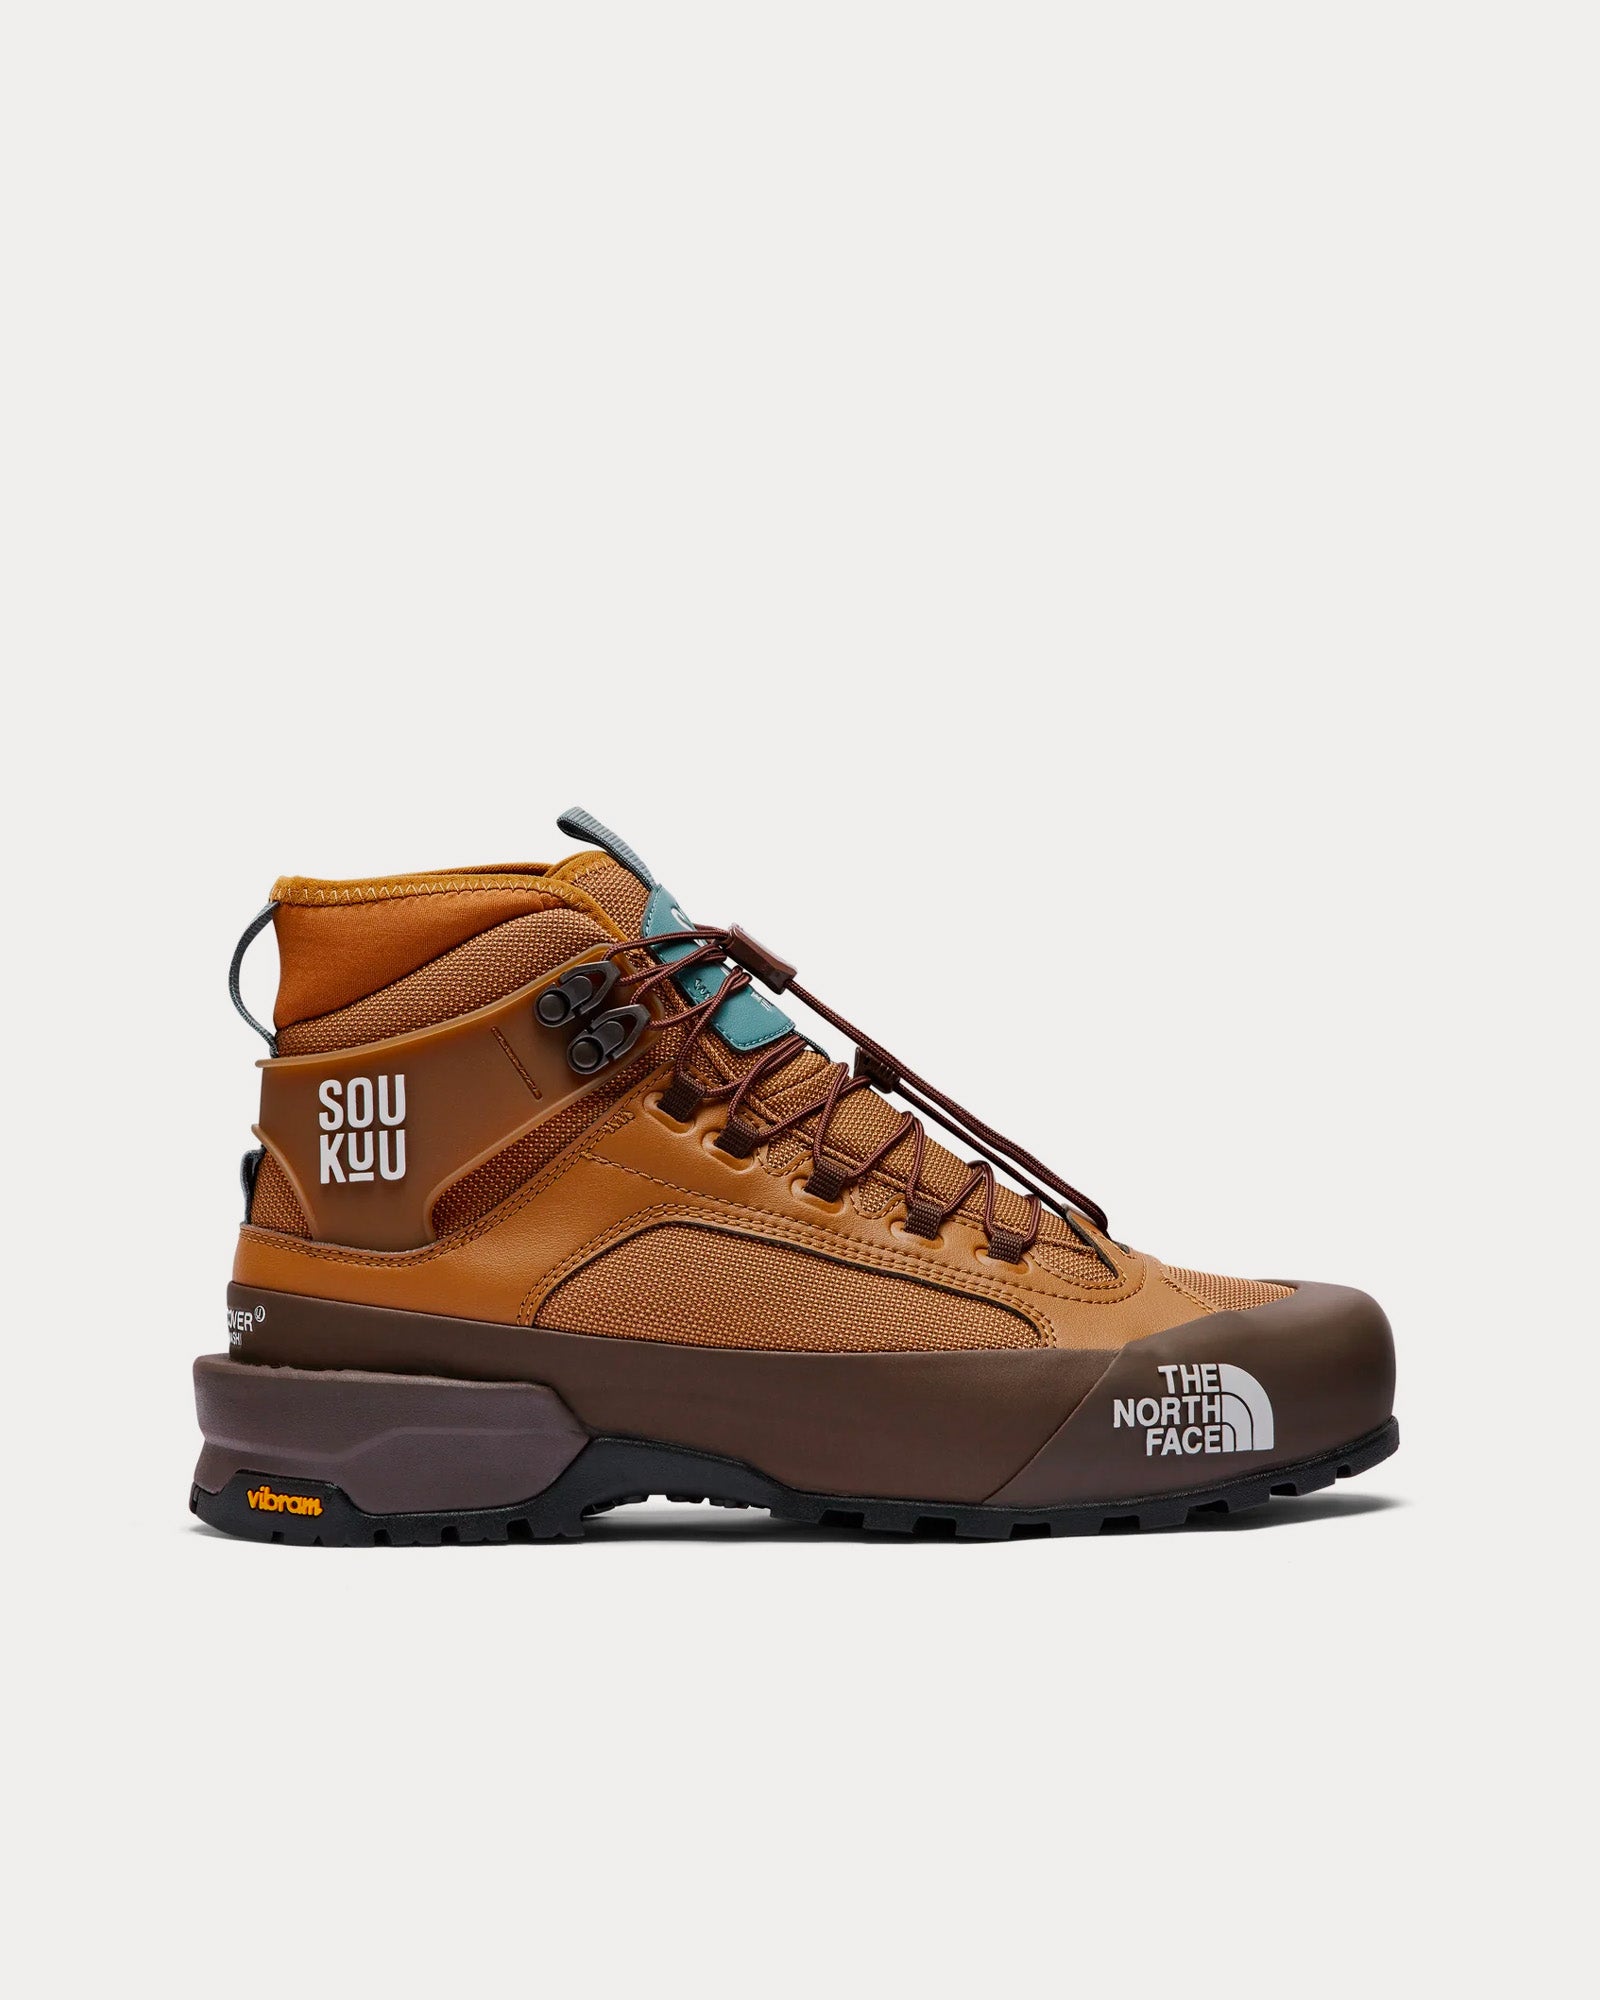 The North Face x Undercover - Soukuu Glenclyffe Street Bronze Brown Boots